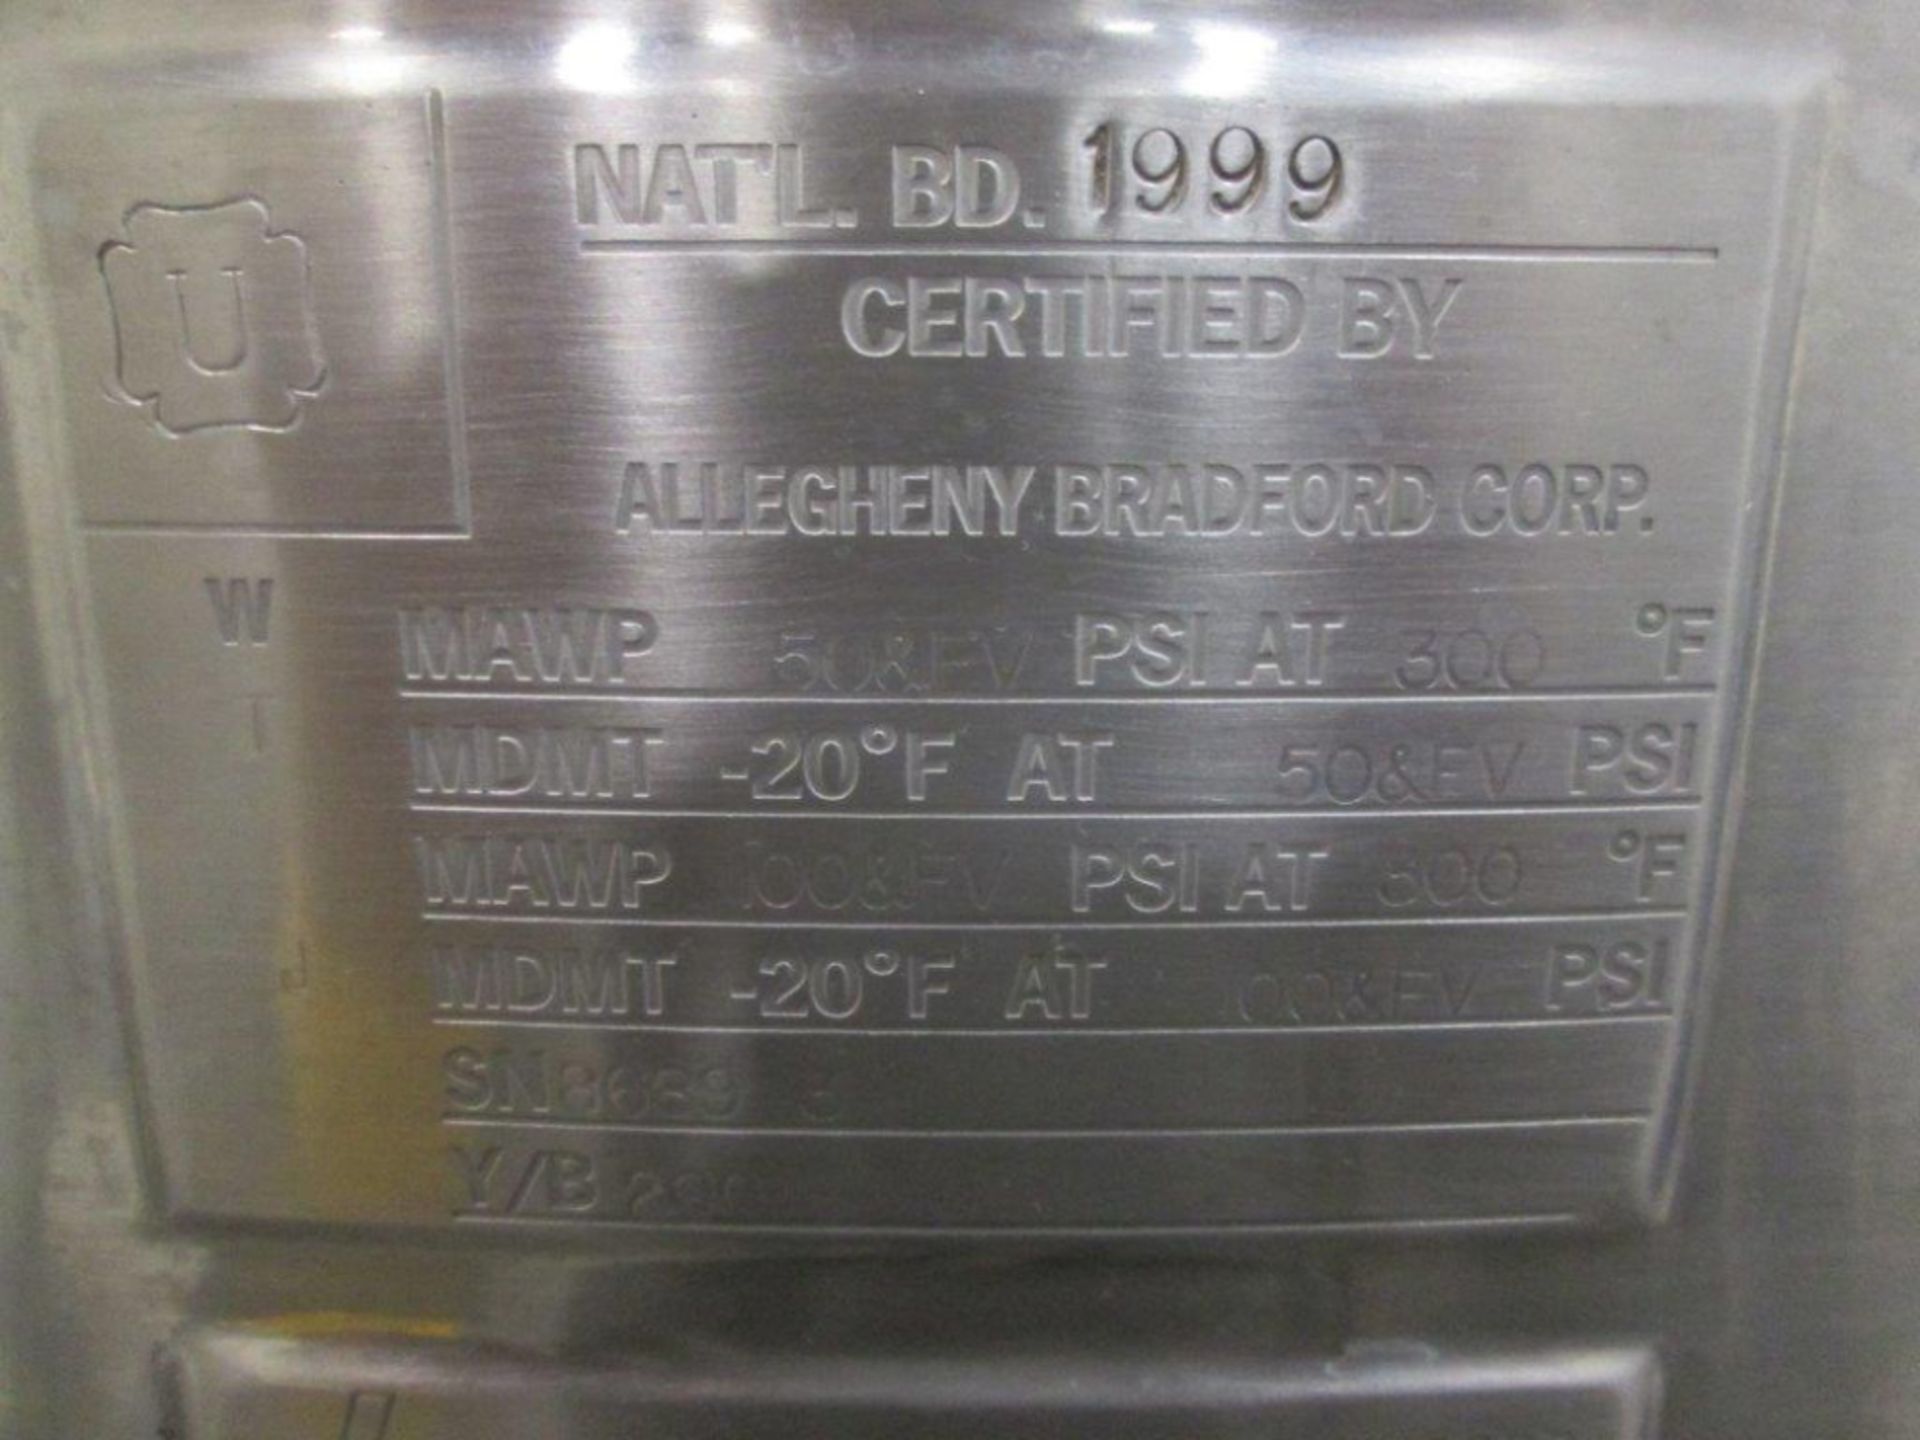 Allegheny Bradford 200L Jacketed Vessel - Image 6 of 6